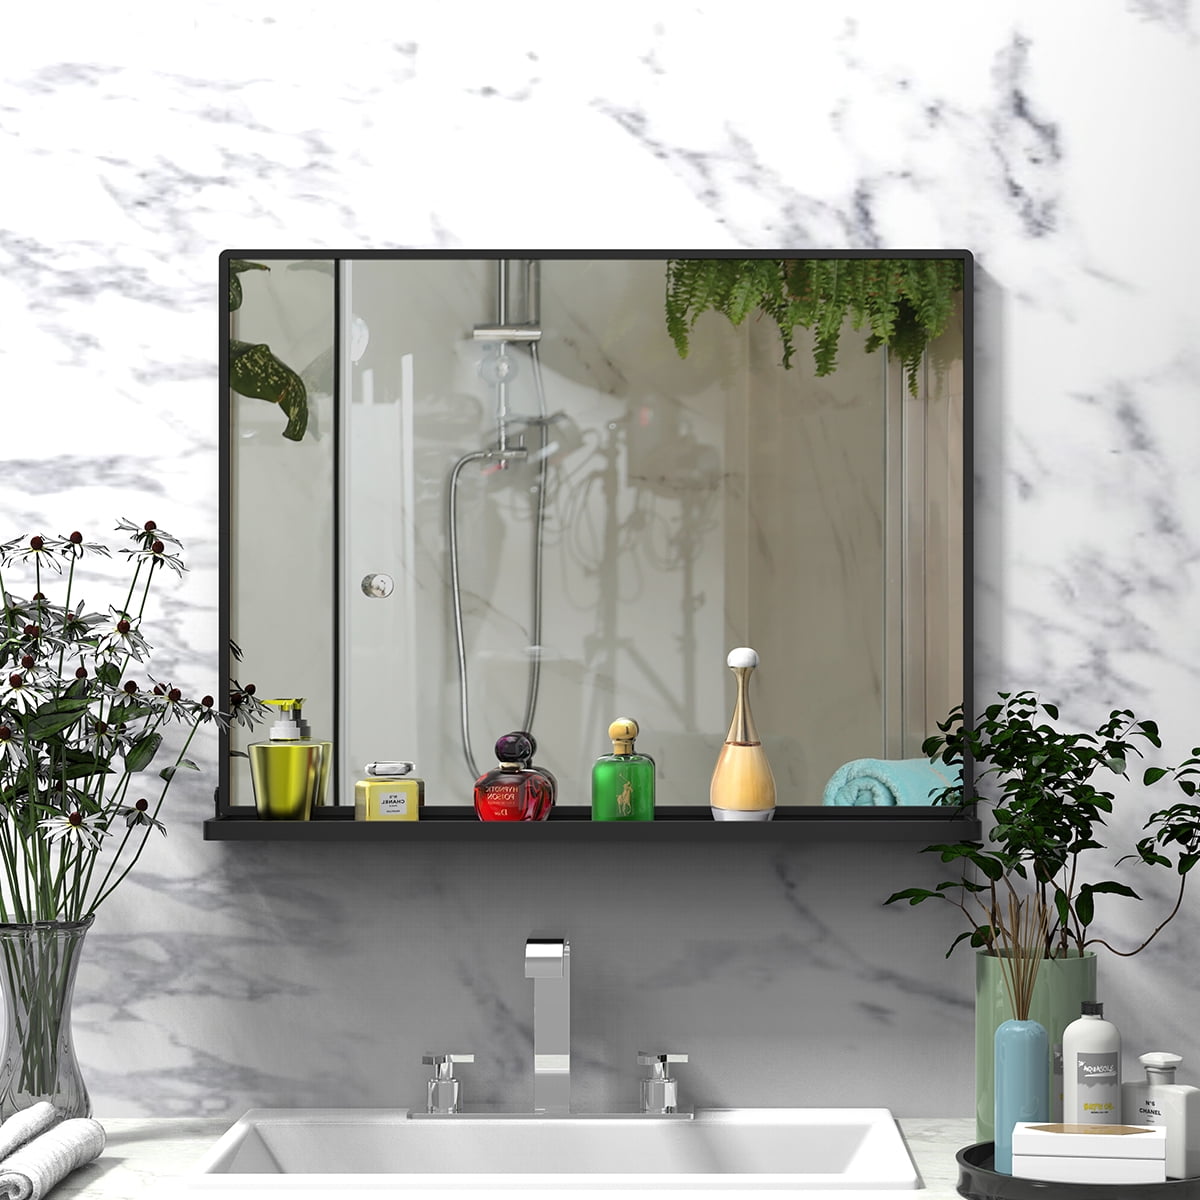 ANYHI White Bathroom Wall Mirror with Shelf, 32x24 Bathroom Mirrors for  Wall, Rectangular Wall Hanging Mirror for Living Room Bedroom Entryway